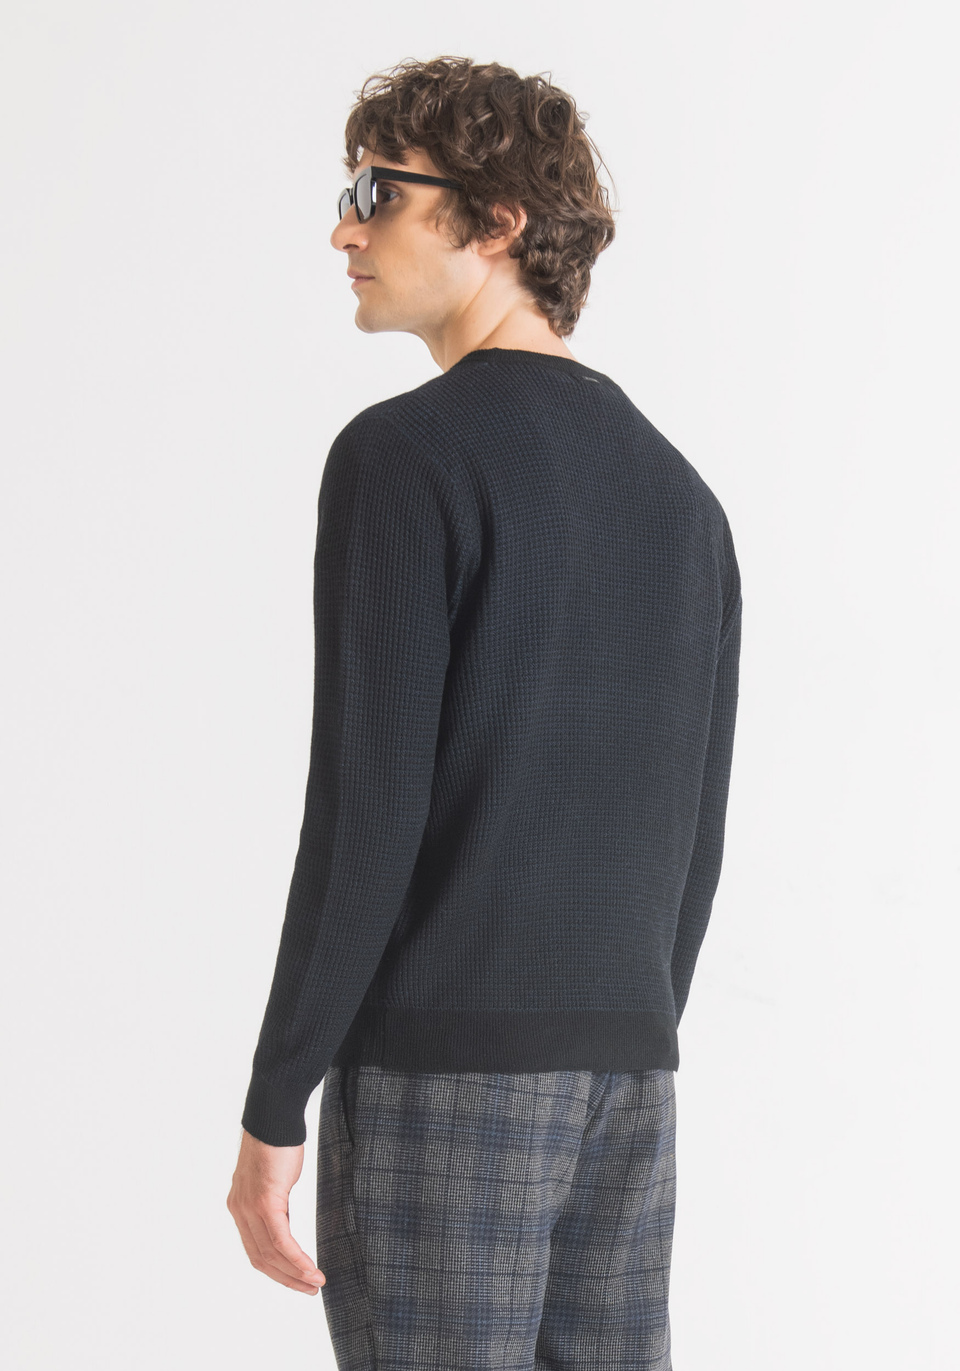 REGULAR-FIT SWEATER IN SOFT MOHAIR WOOL-BLEND YARN WITH ALL-OVER MICRO-PATTERN - Antony Morato Online Shop